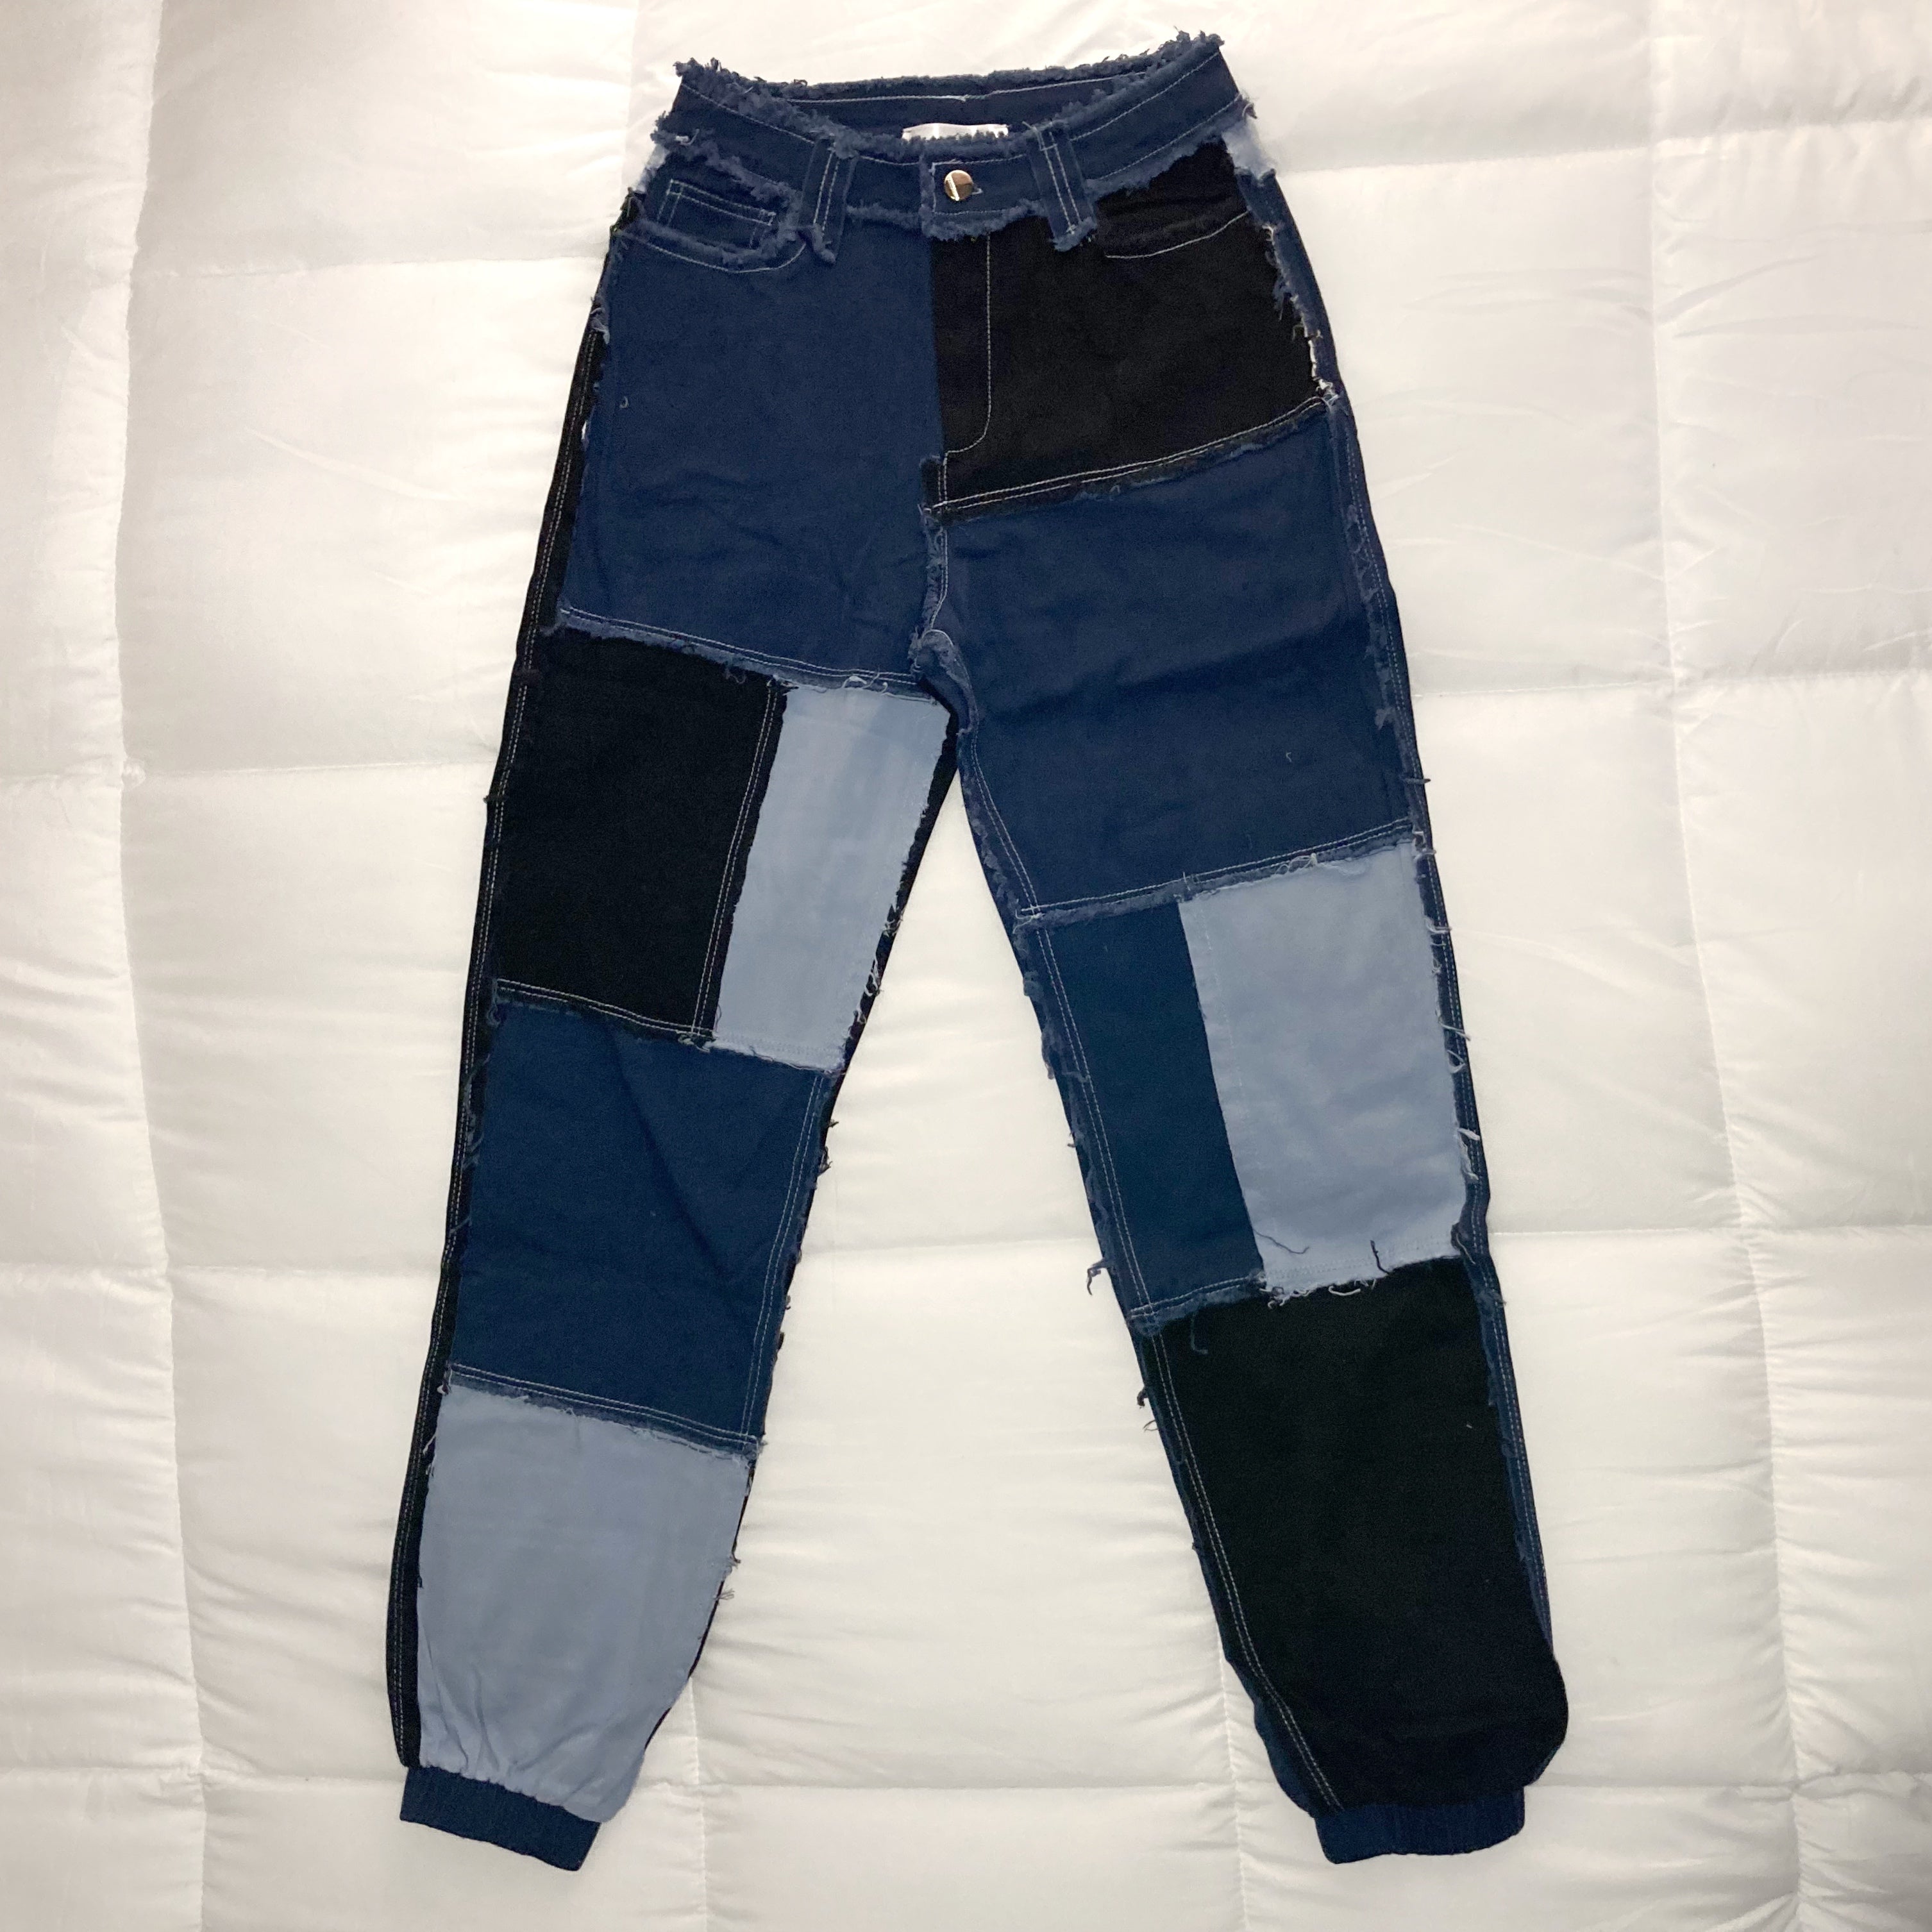 Stop And Stare Patchwork Pants